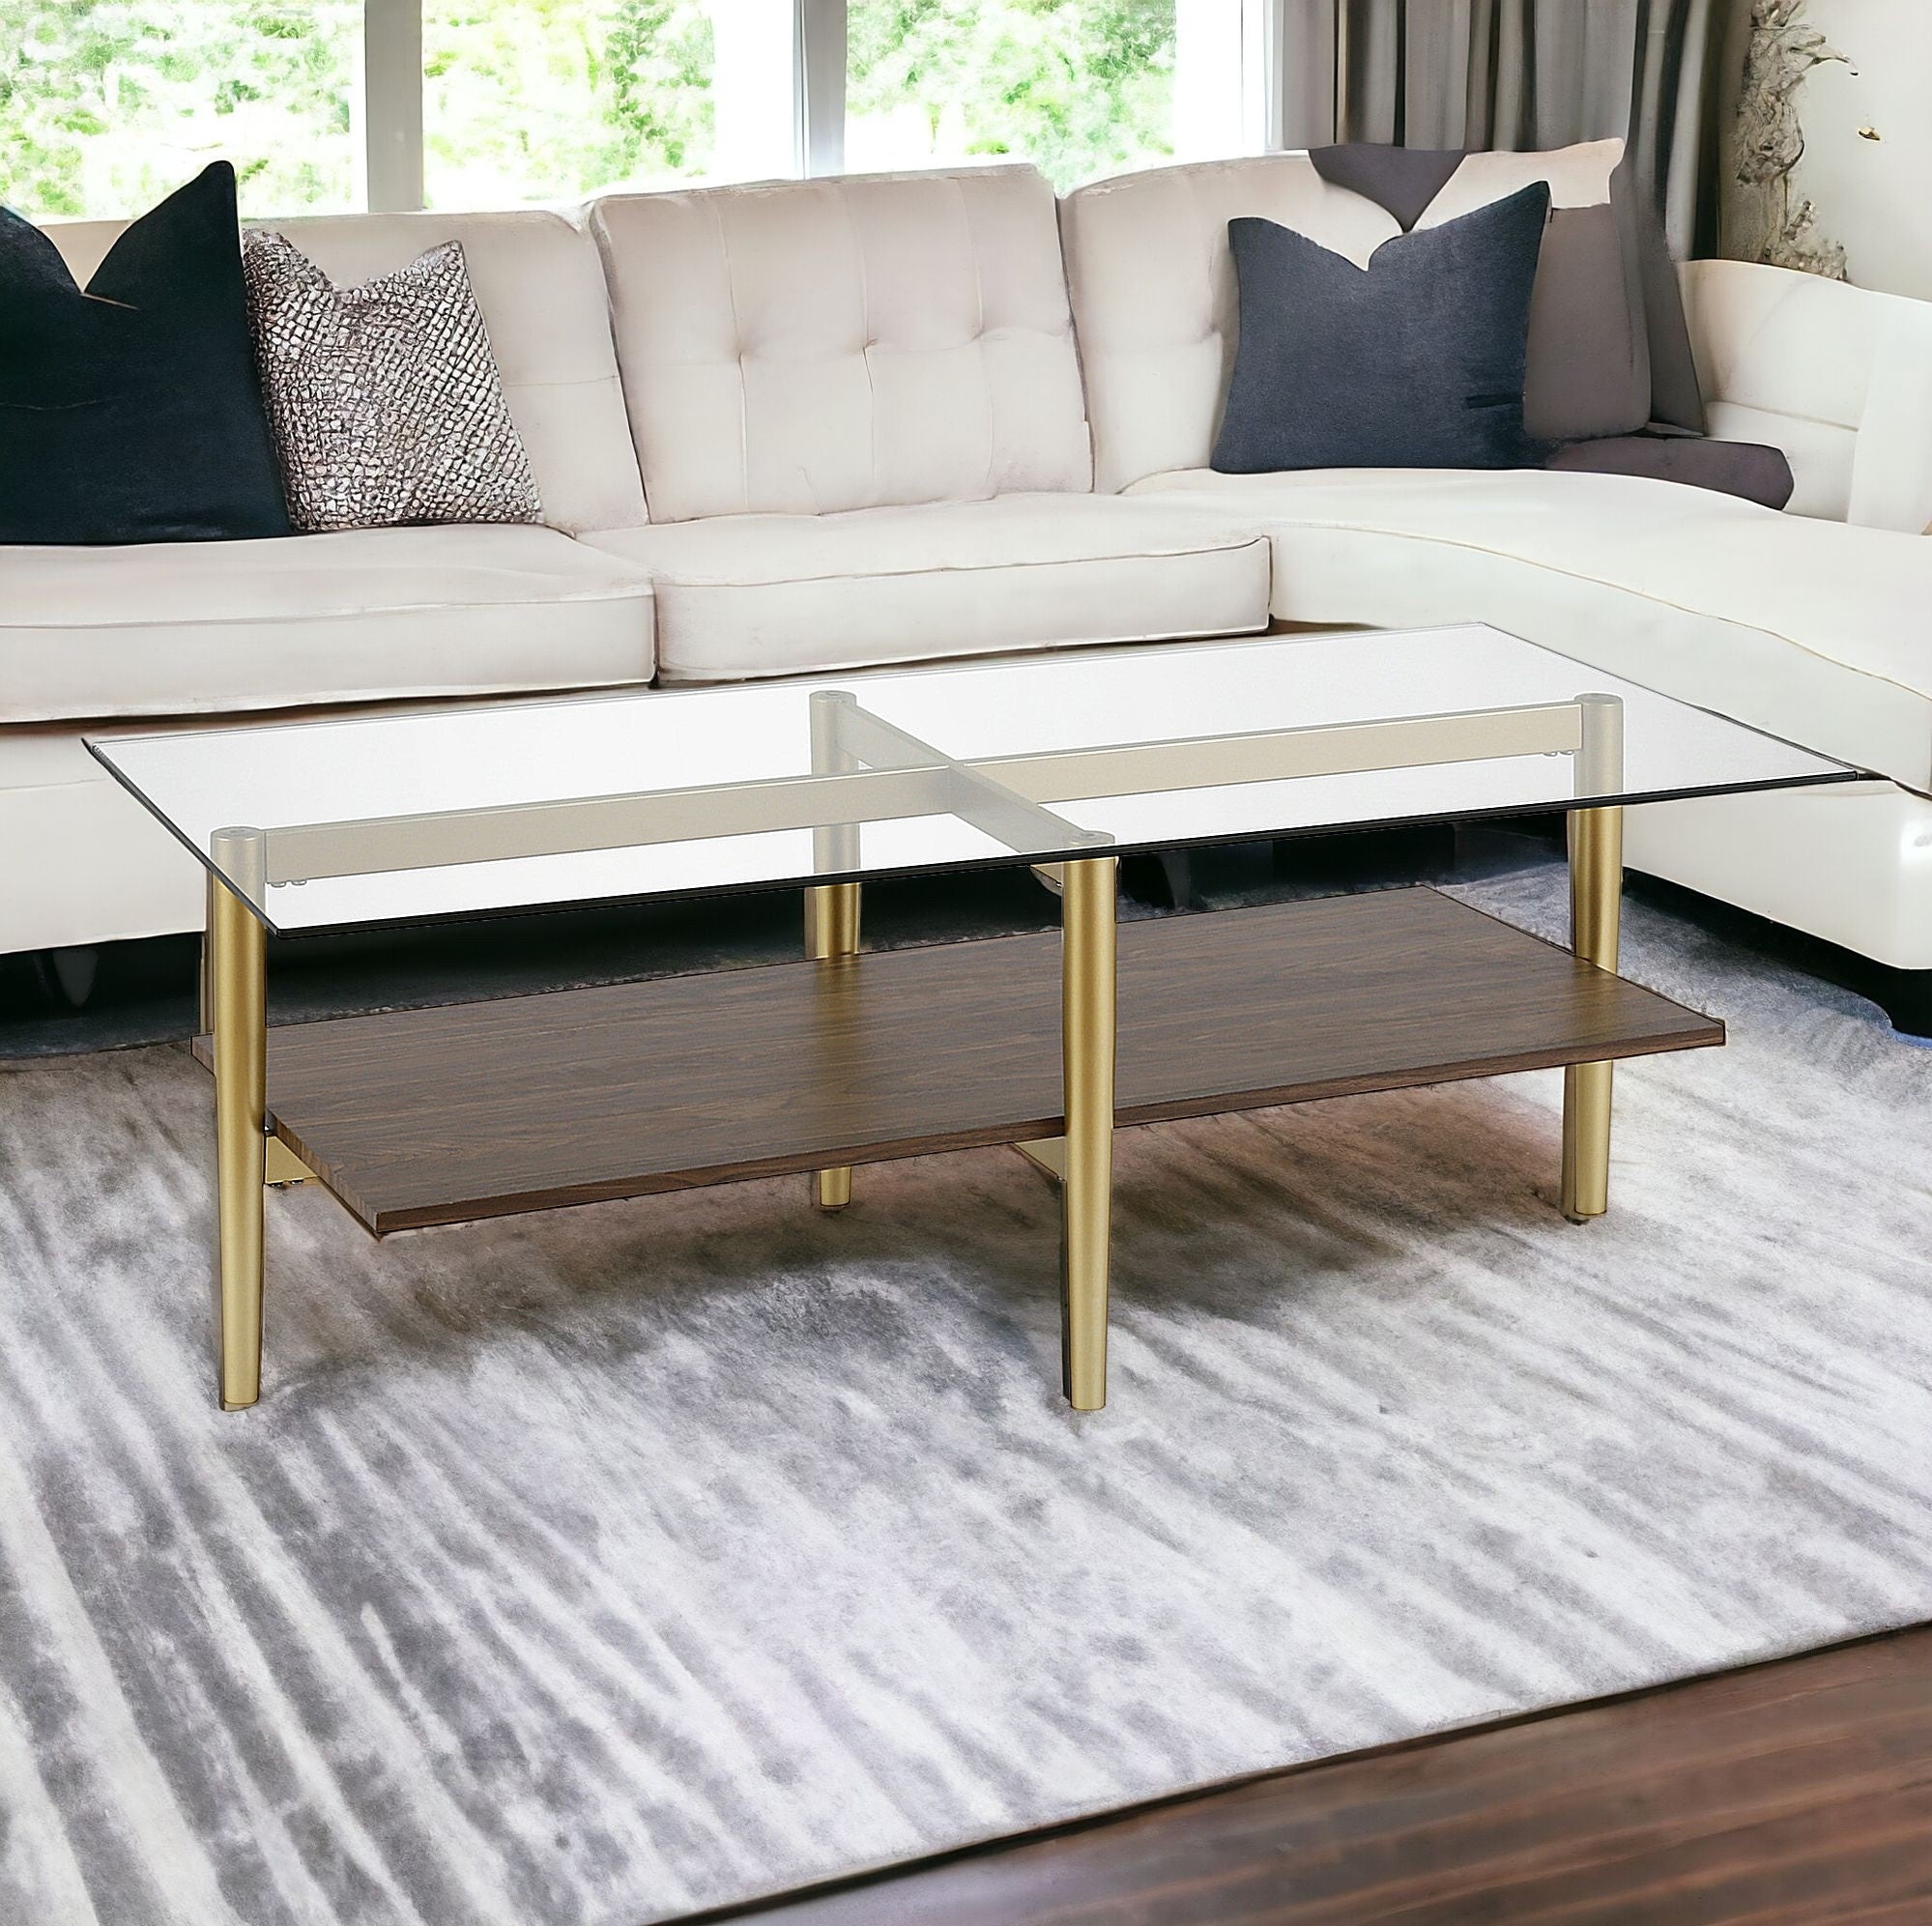 47" Gold Glass And Steel Coffee Table With Shelf